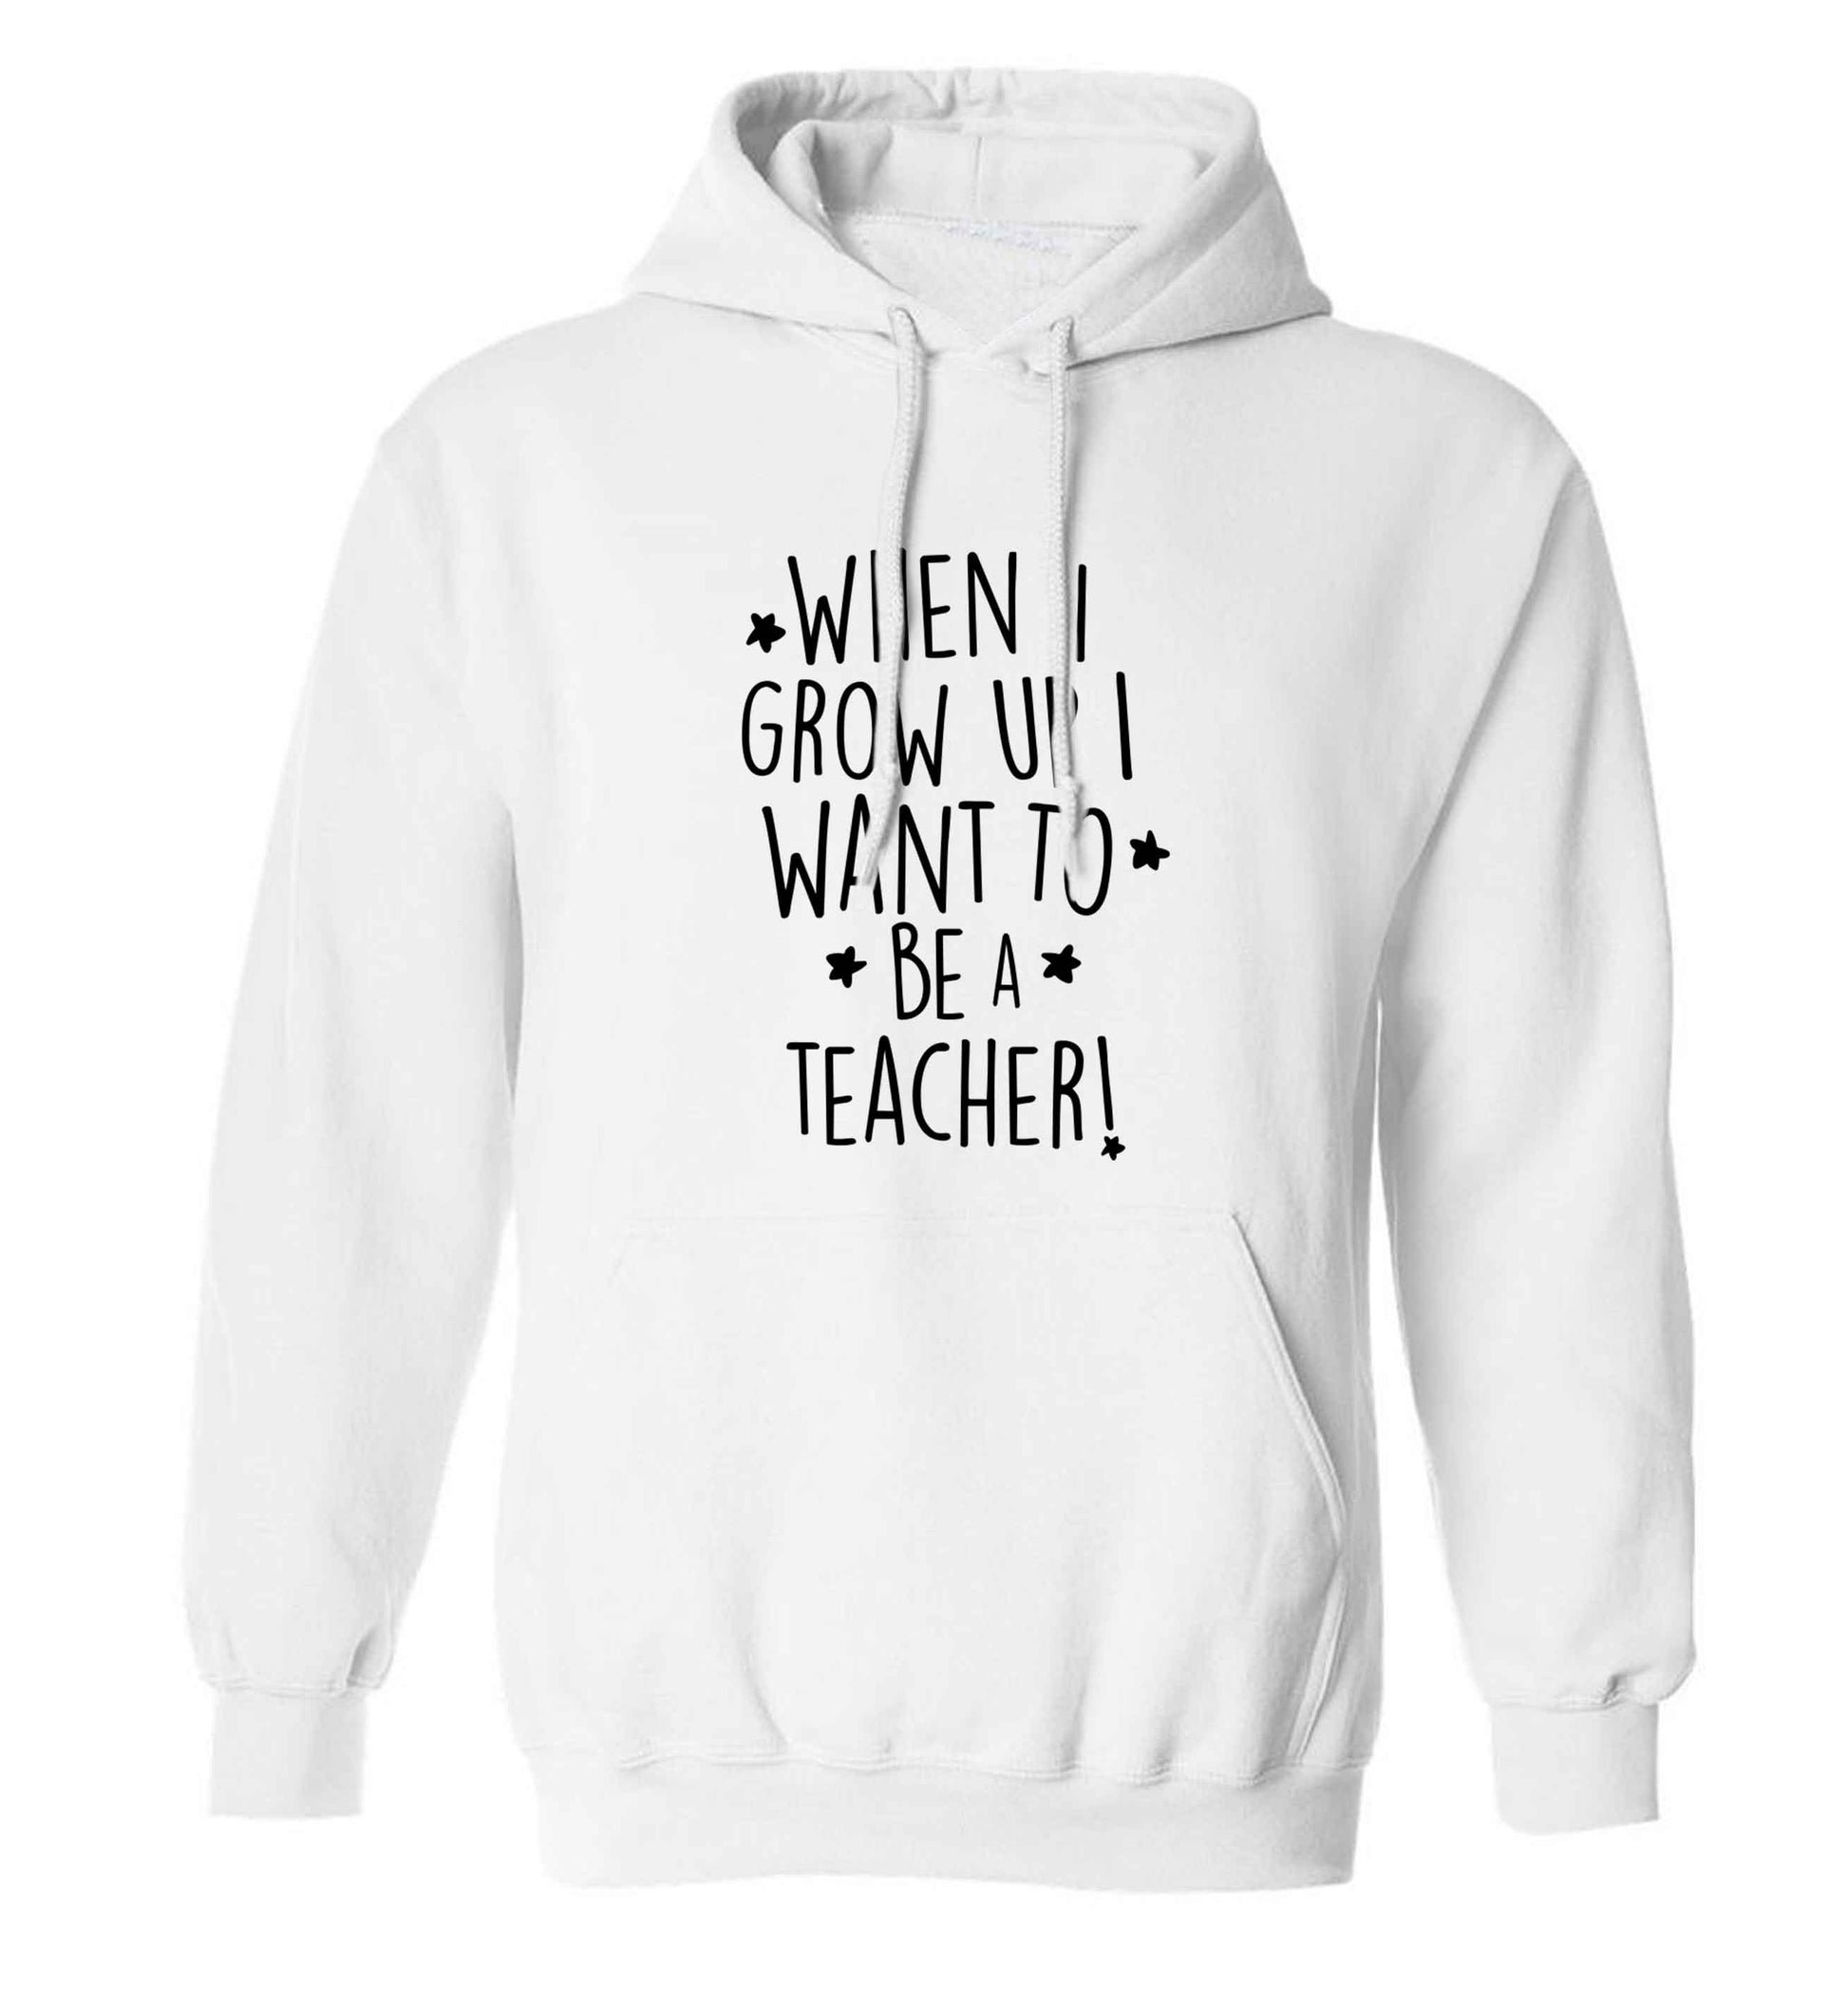 When I grow up I want to be a teacher adults unisex white hoodie 2XL